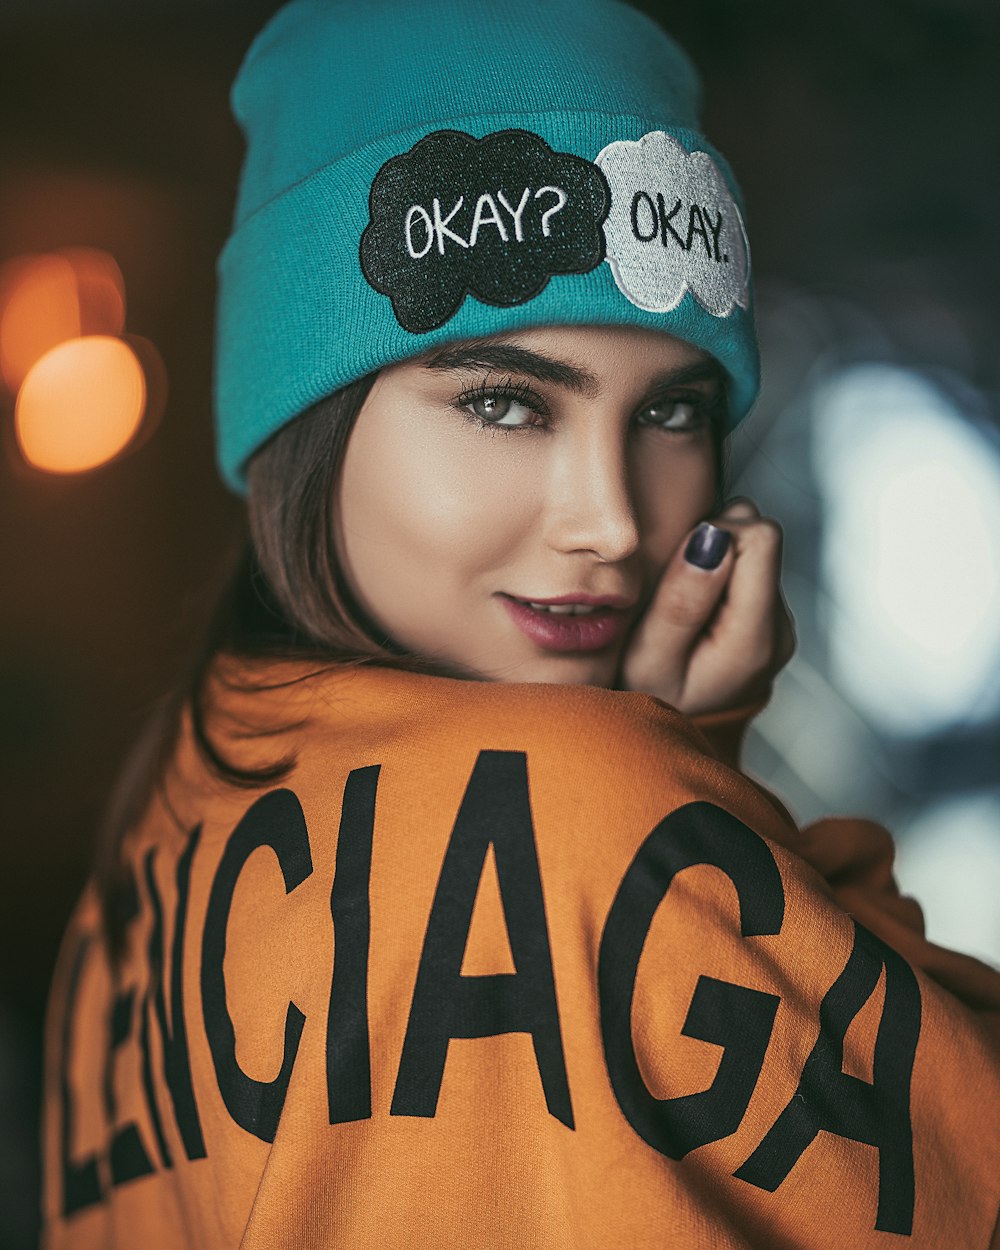 woman wearing orange and black sweater and teal beanie smiling